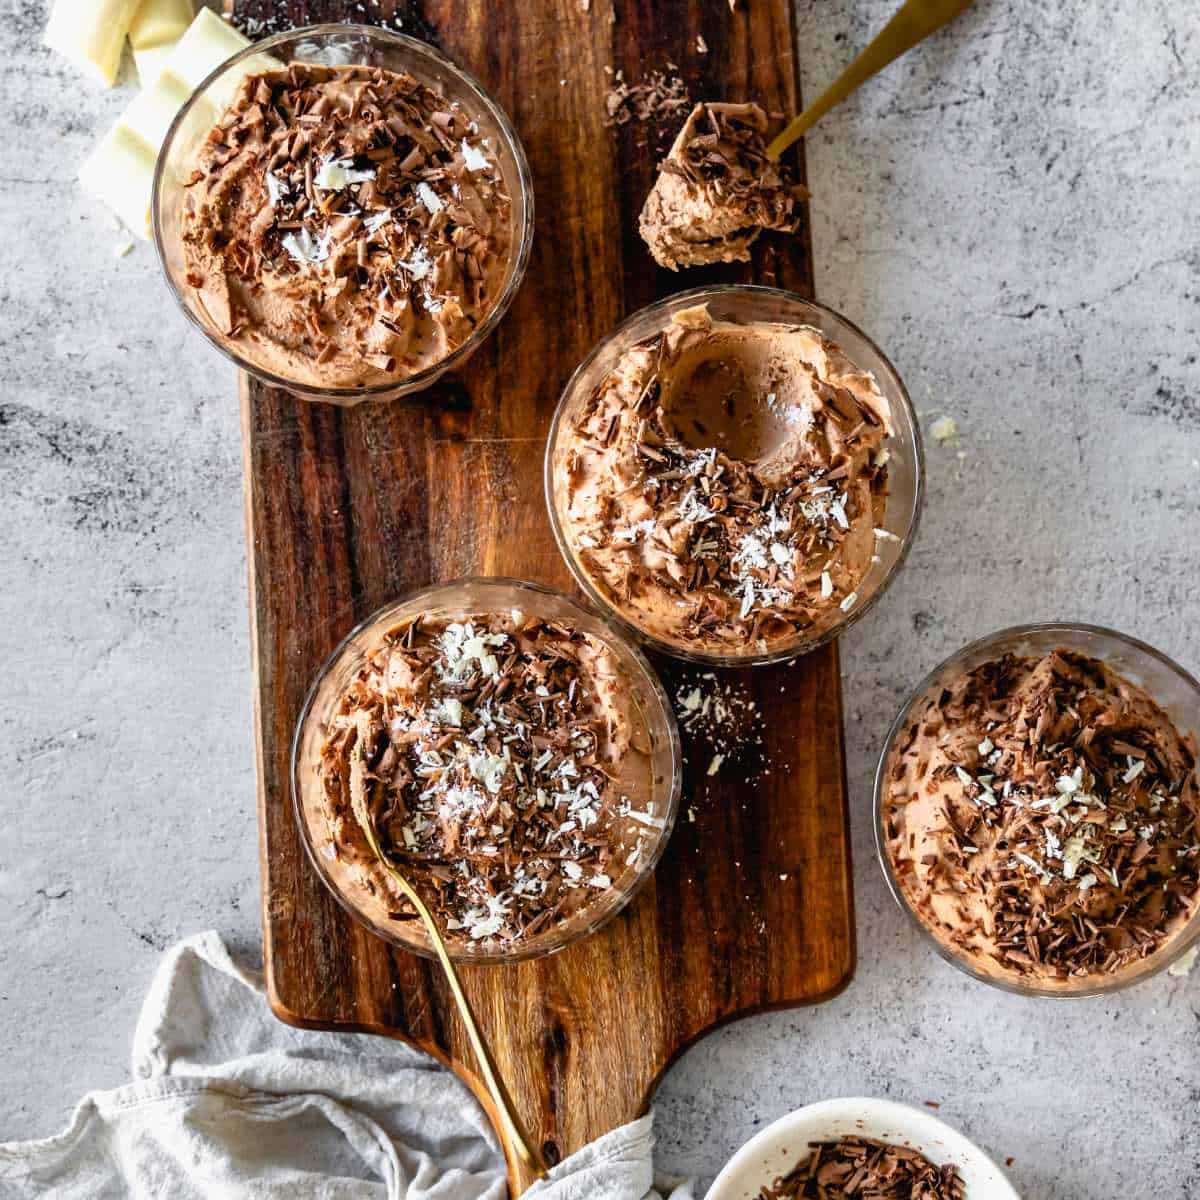 Four individual chocolate mousse's served in small glass dishes with shredded chocolate and coconut sprinkled on top